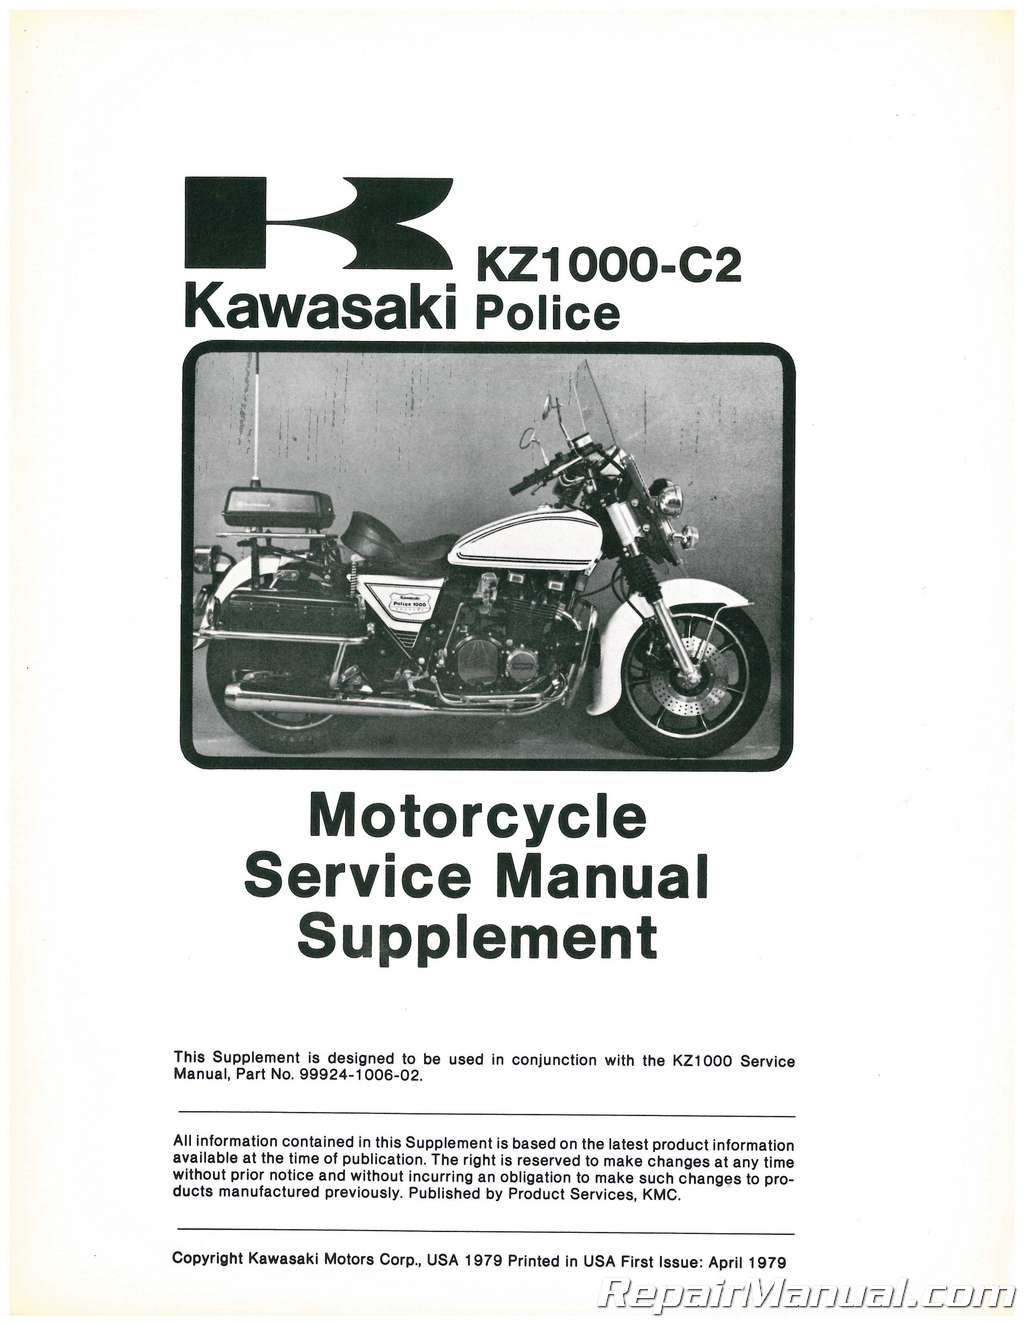 1981 Kawasaki KZ1000 Police Motorcycle Service Manual Supplement STAINED DEAL 